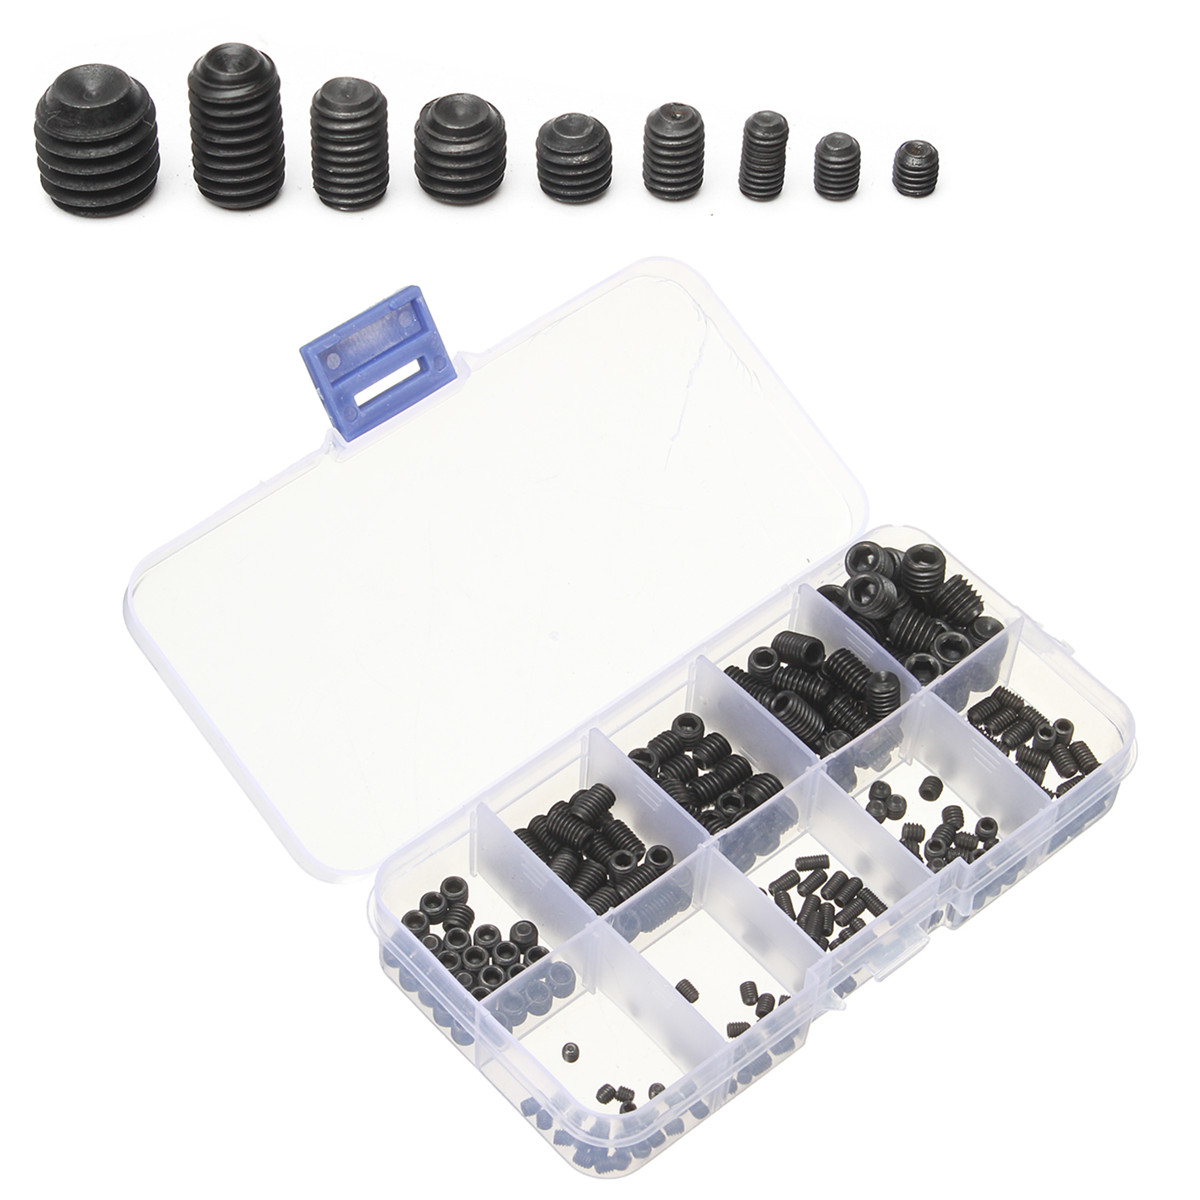 Sulevetrade-MXAS1-250Pcs-Head-Socket-Hex-Set-Grub-Screw-Cup-Point-Alloy-Steel-Assortment-With-Case-1129439-1